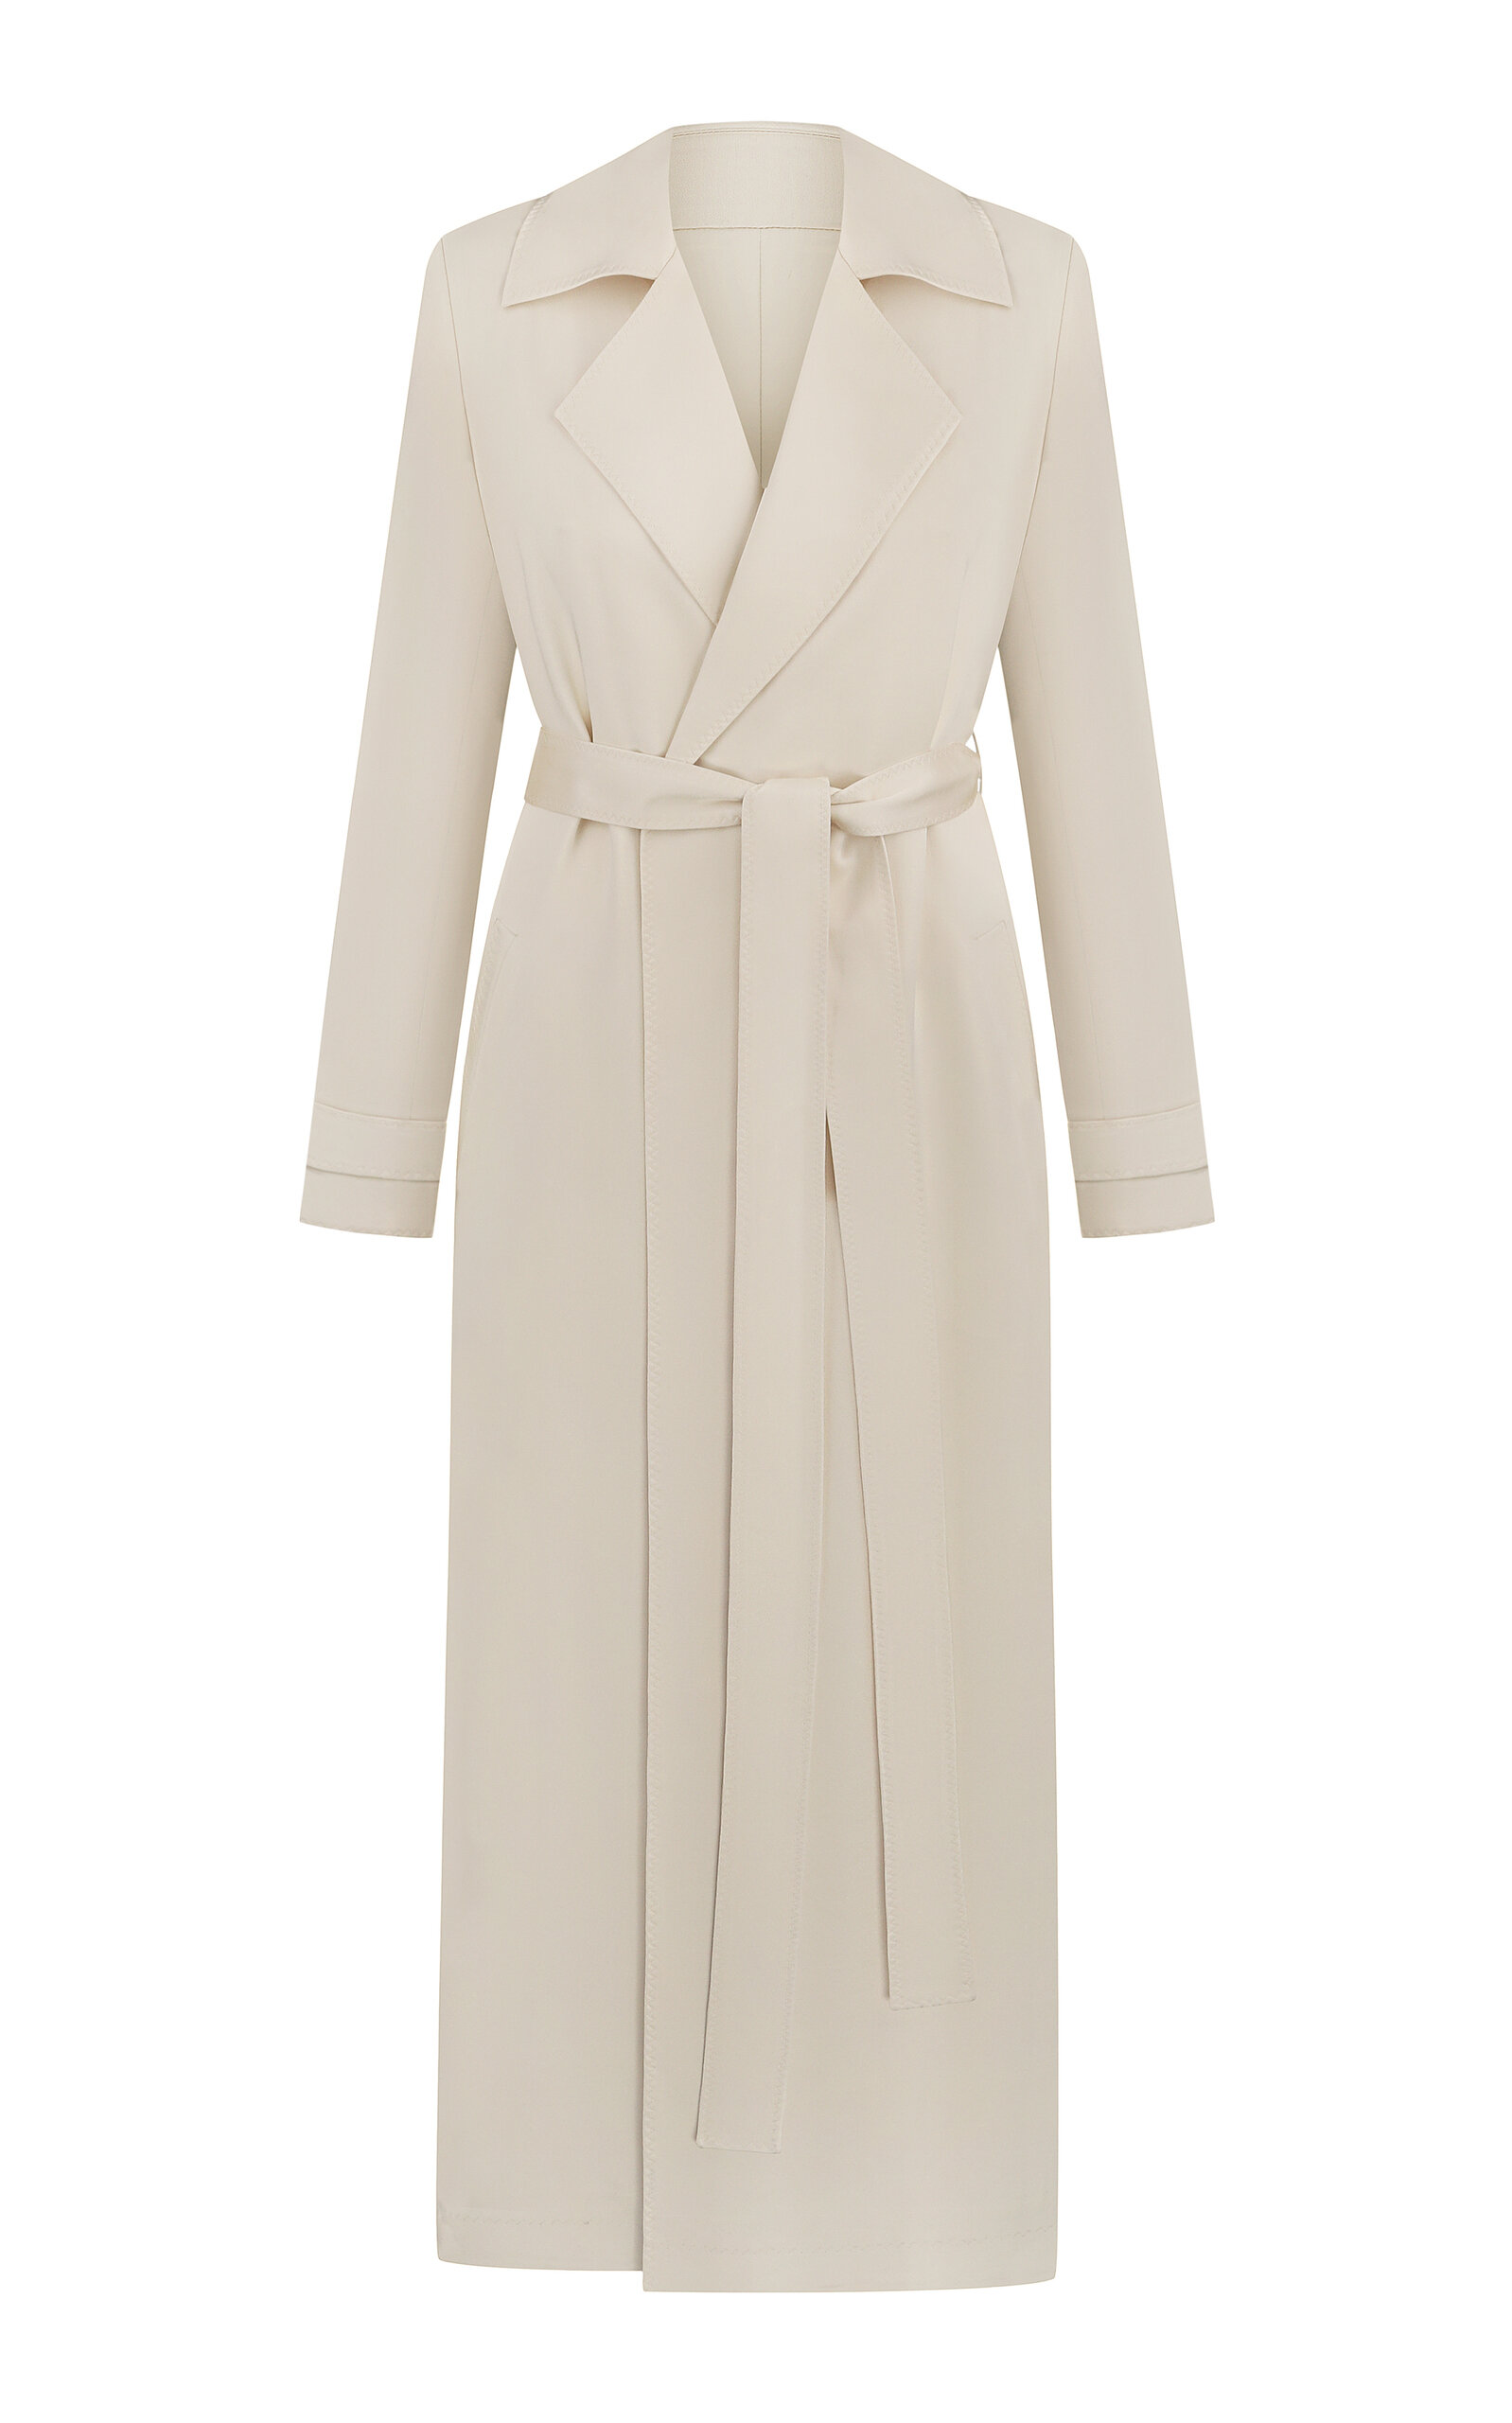 Anna October Gaia Satin Trench Coat In Ivory